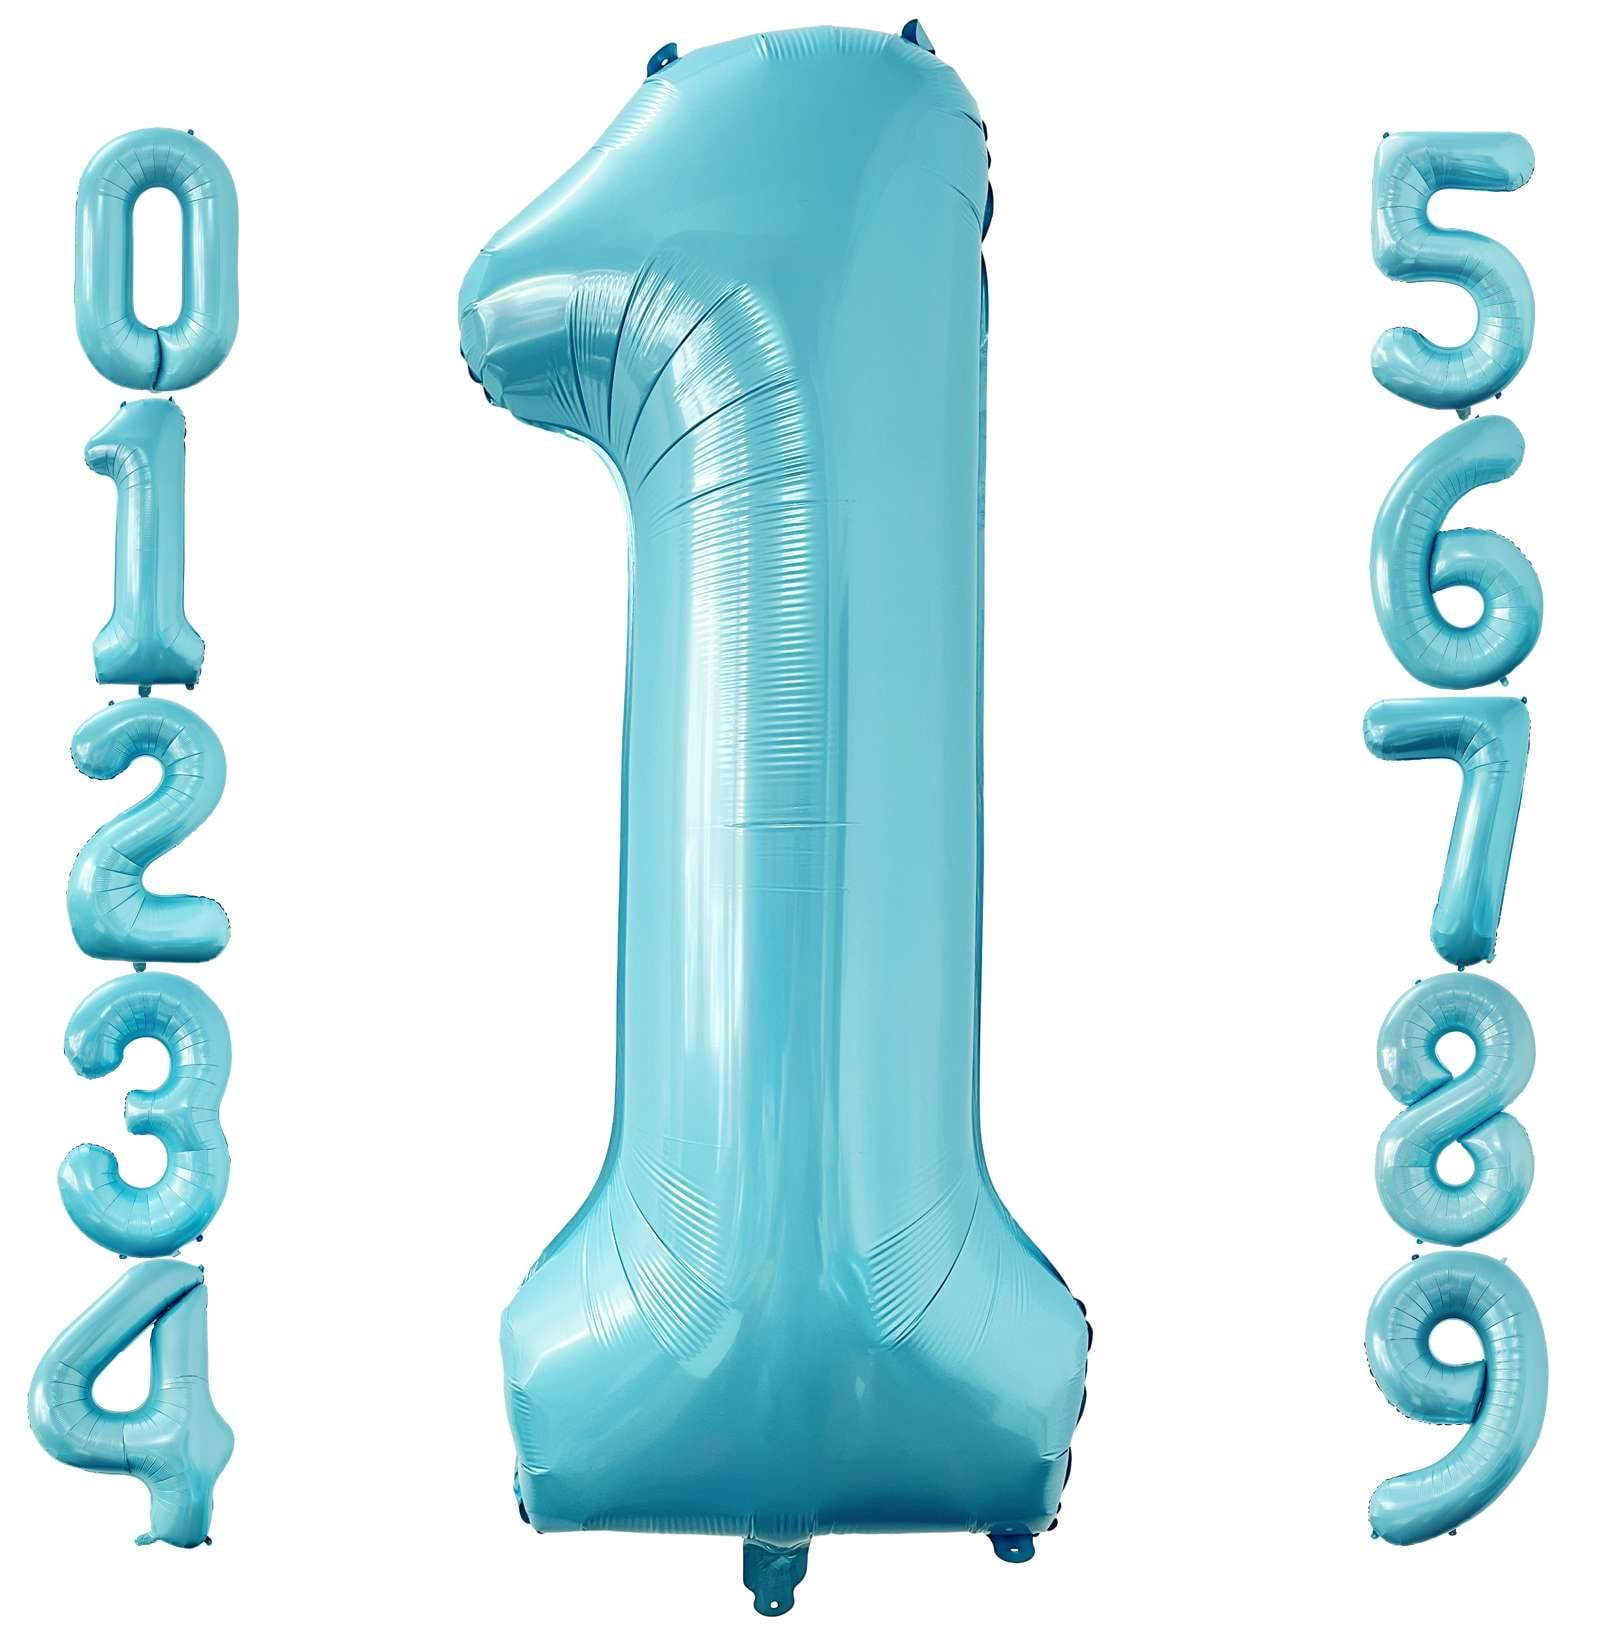 PartyWoo Teal Balloons, 100 pcs Teal Blue Balloons Pack of 36 inch 18 inch  12 inch 10 inch 5 inch for Turquoise Balloon Garland Arch Kit Theme Party